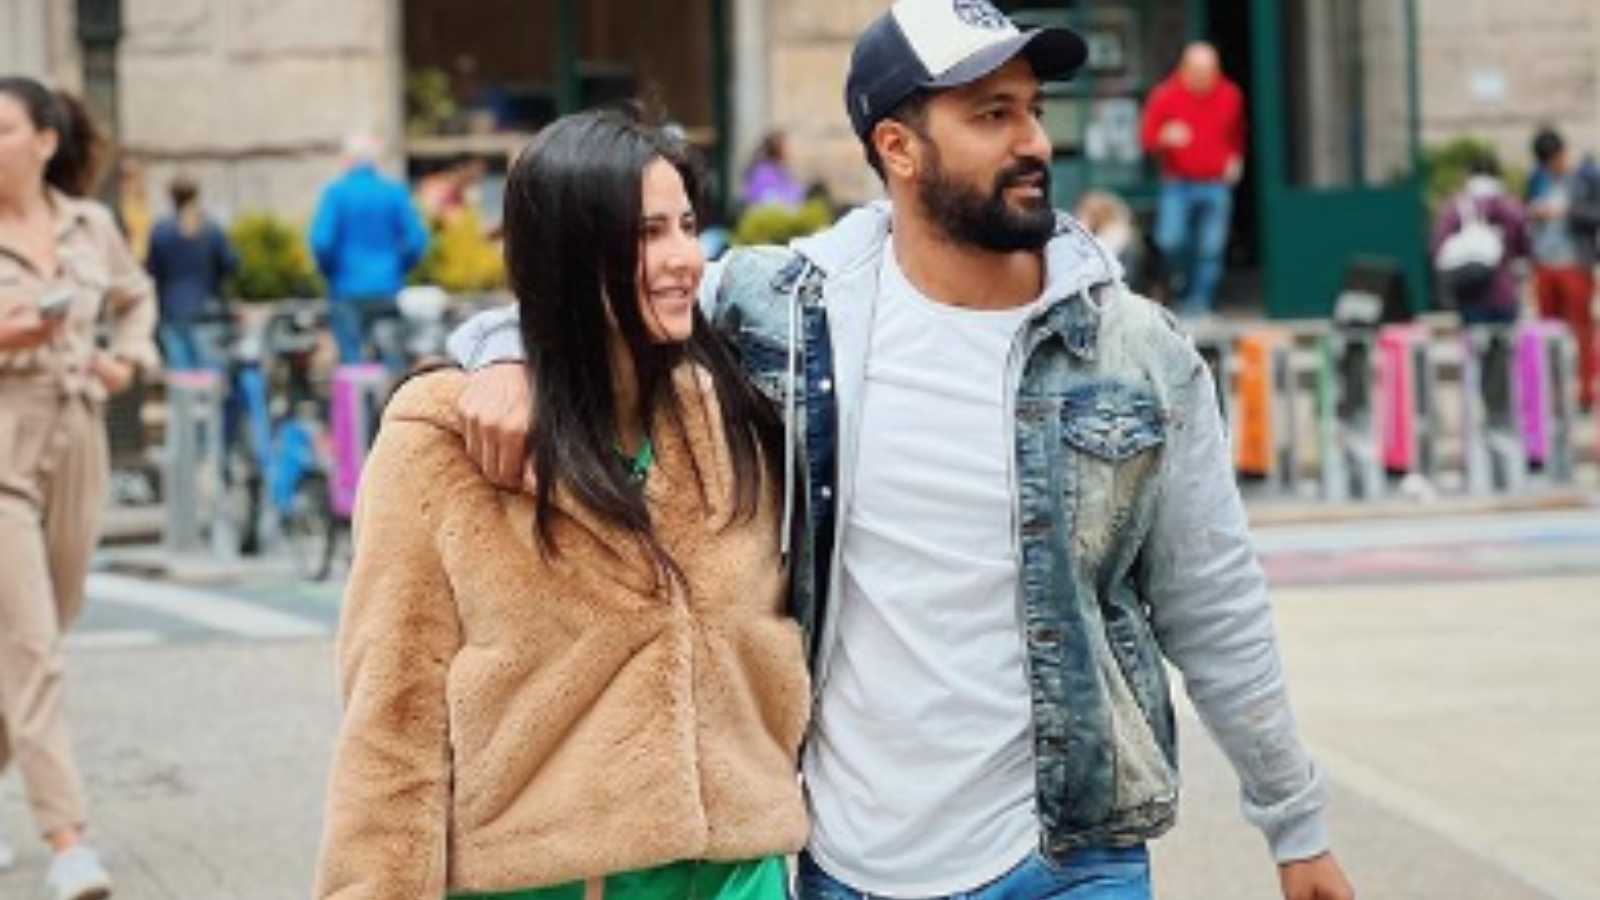 Koffee With Karan 7: Vicky Kaushal revealed what he and Katrina Kaif fight about and it's the plight of every newlywed ever